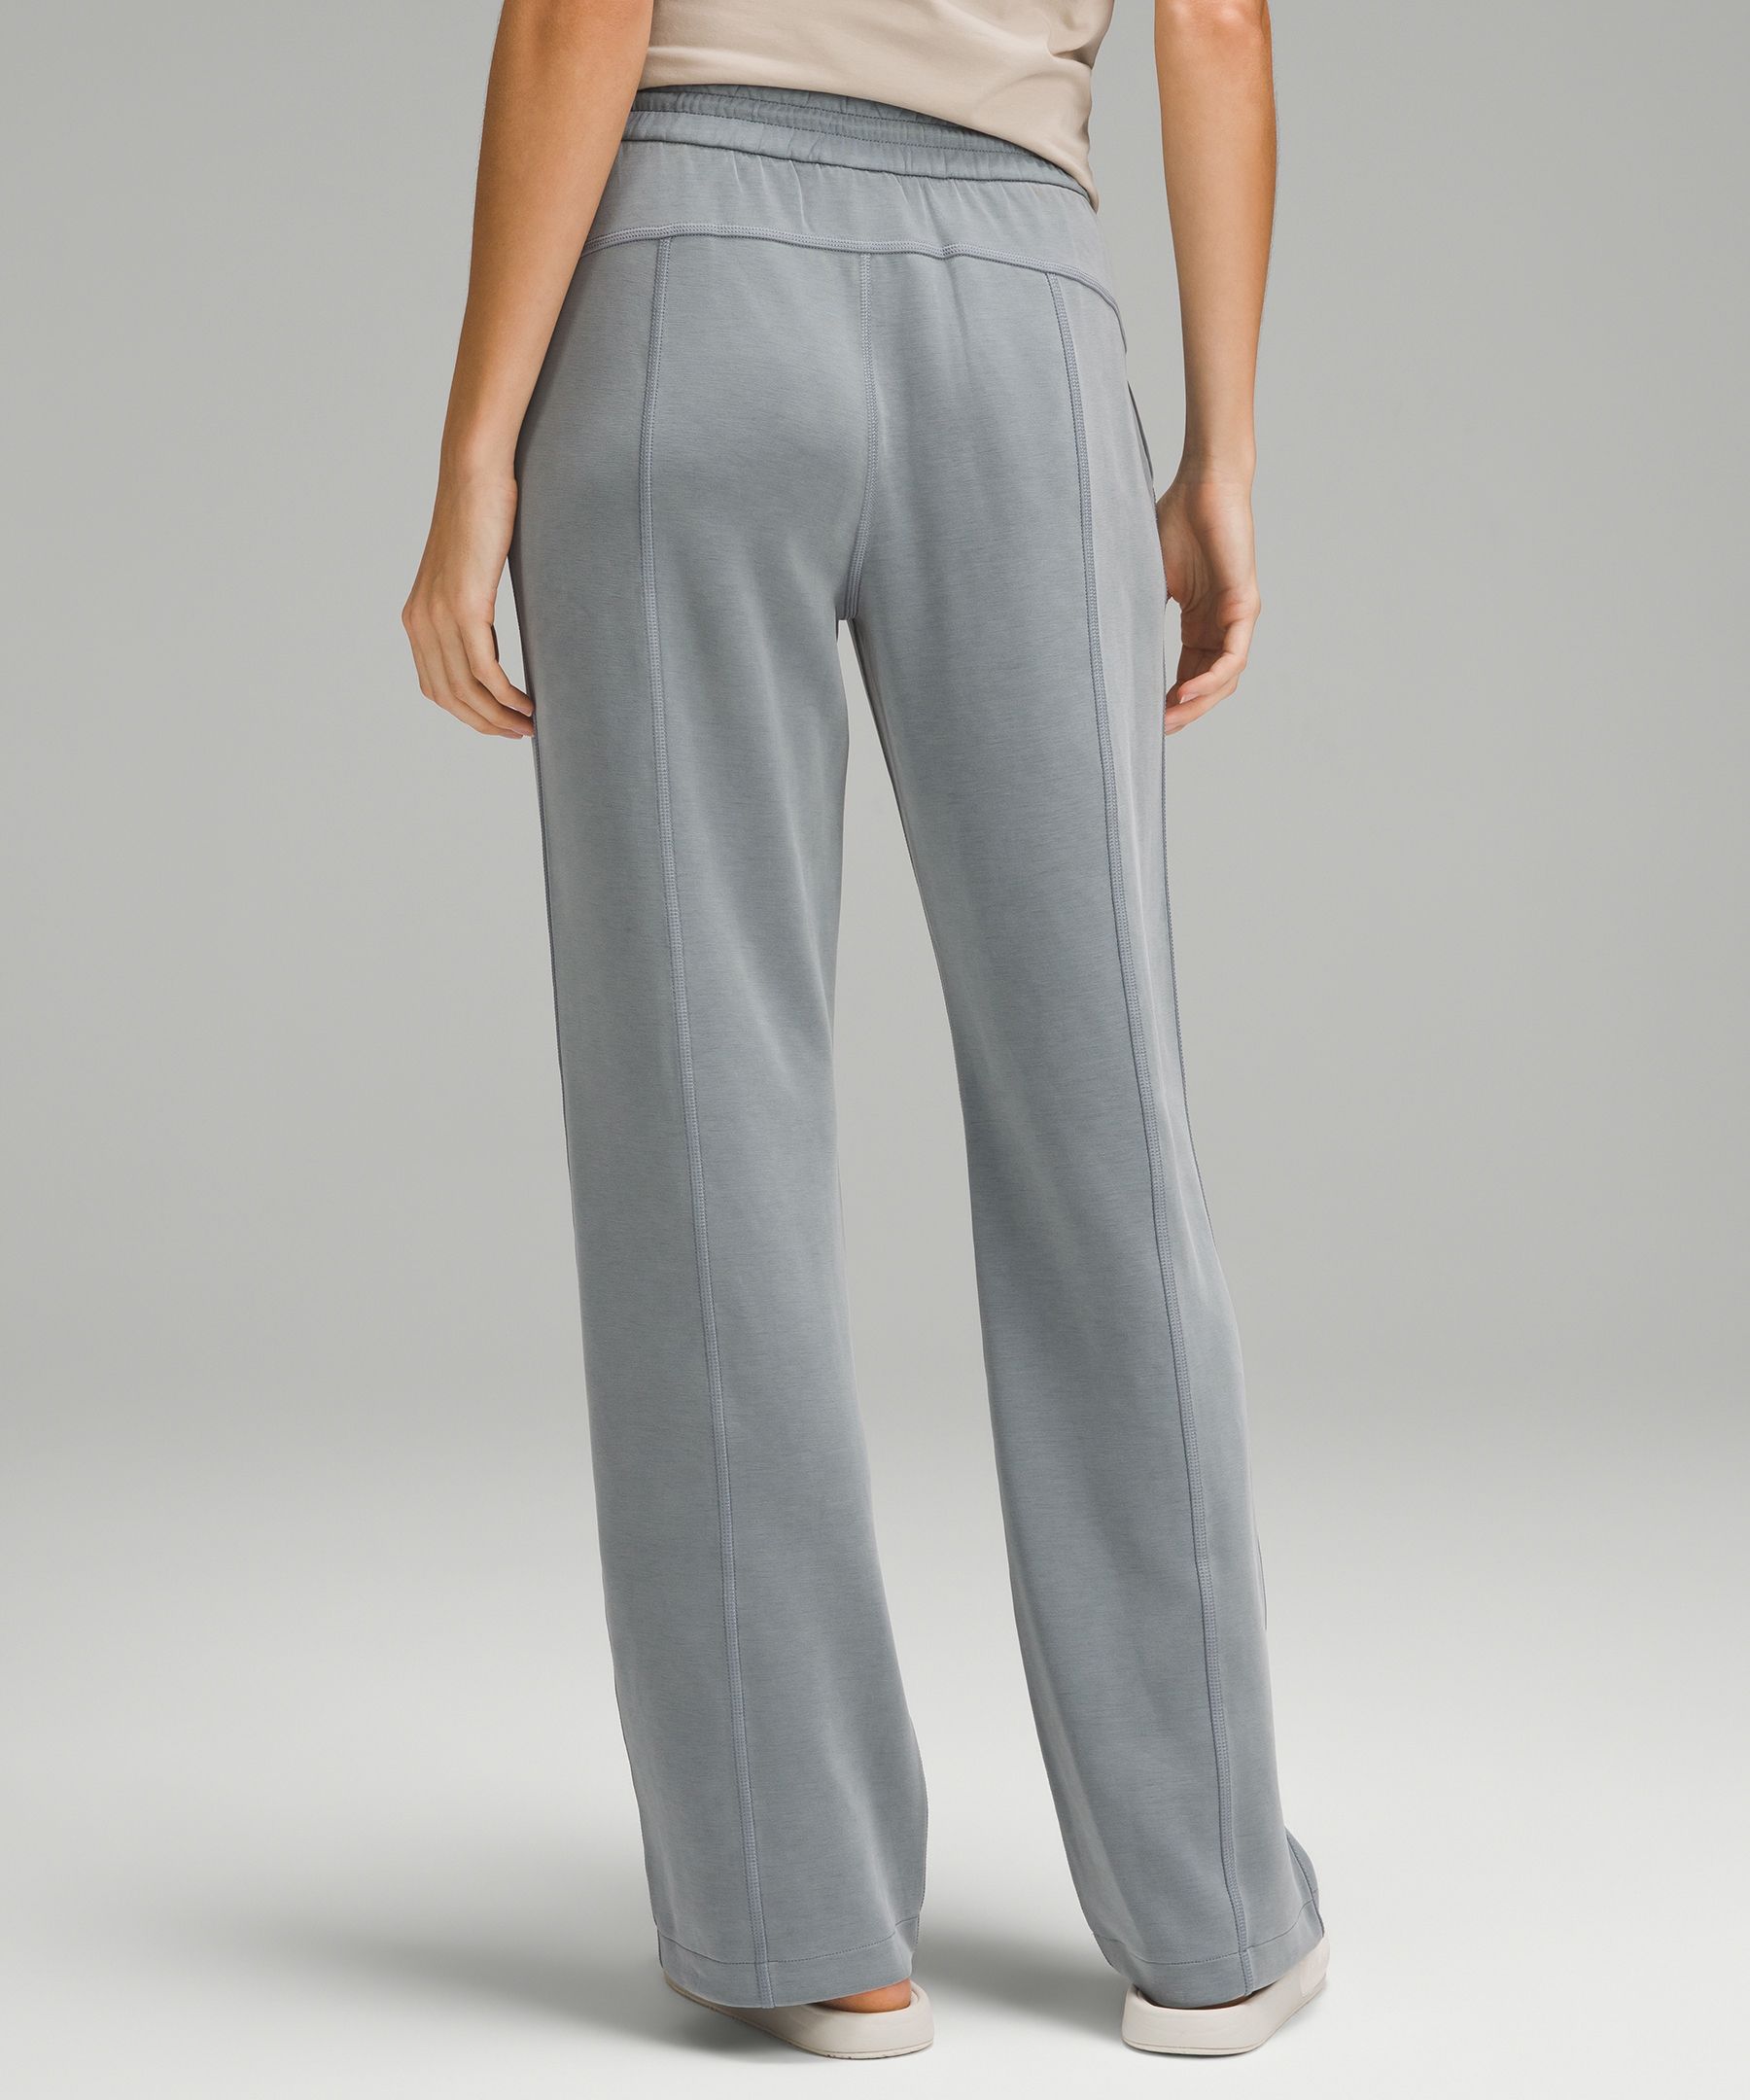 Lululemon Softstreme Relaxed High Rise Pant in Night Sea Size 2 C2